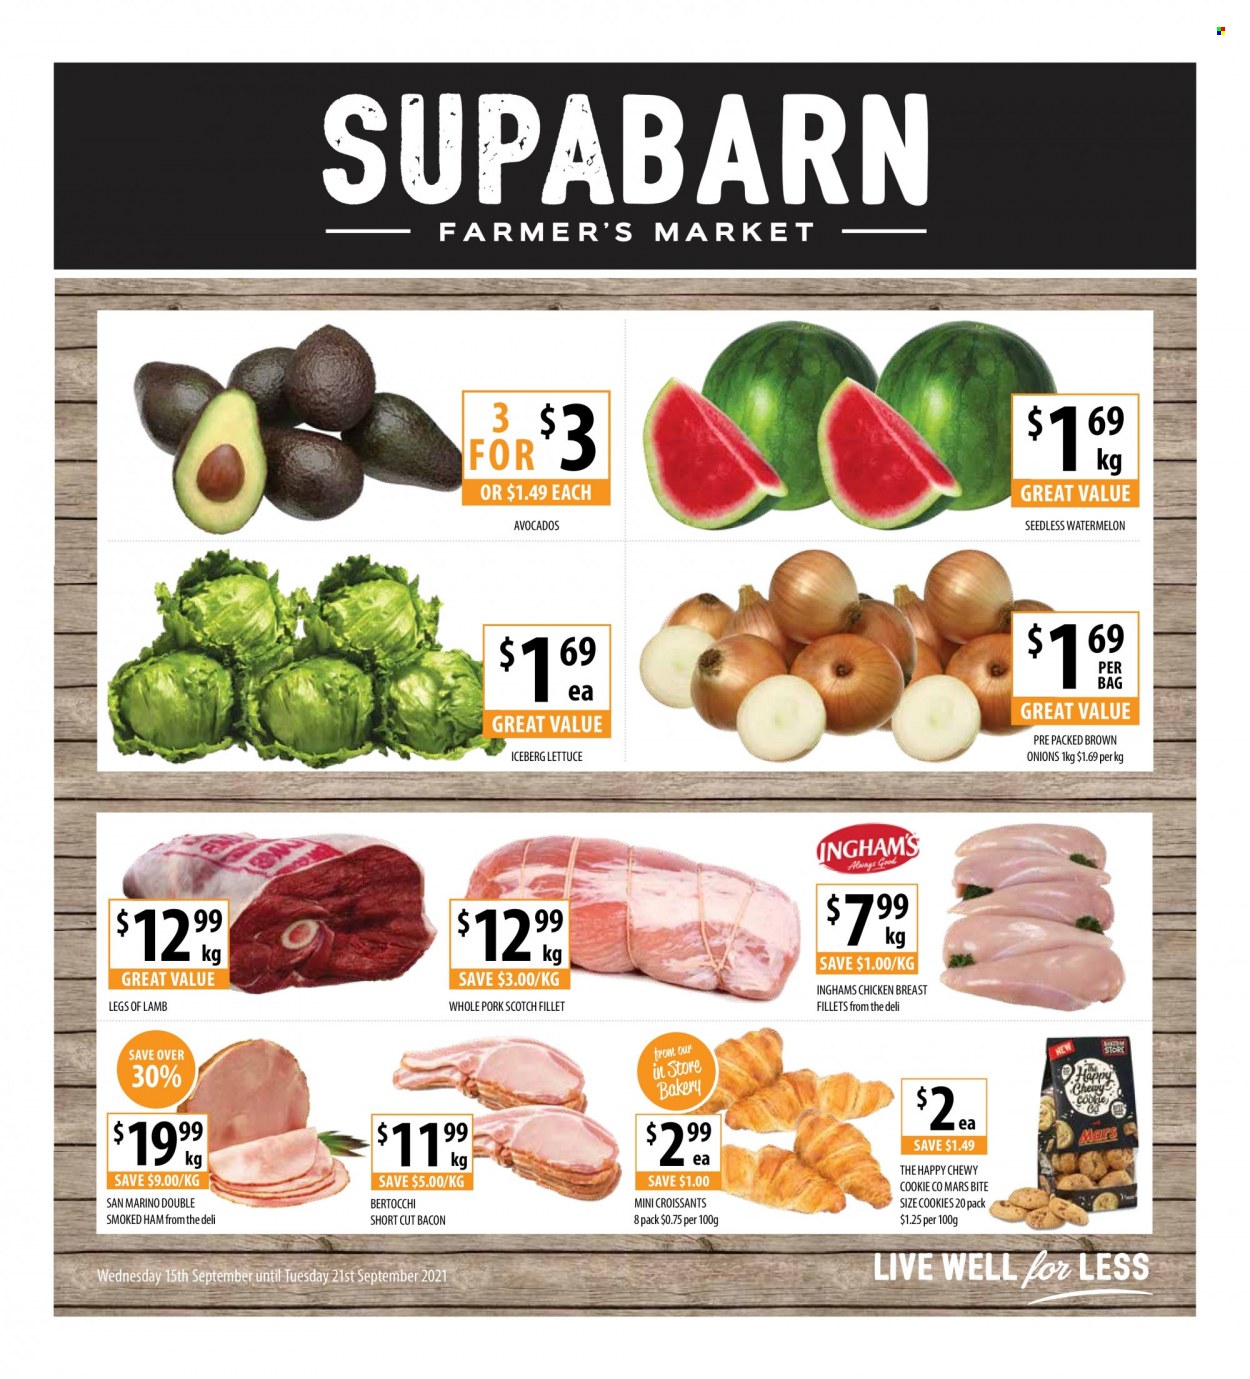 thumbnail - Supabarn Catalogue - 15 Sep 2021 - 21 Sep 2021 - Sales products - croissant, onion, lettuce, avocado, watermelon, bacon, ham, smoked ham, cookies, Mars, chicken breasts, bag. Page 1.